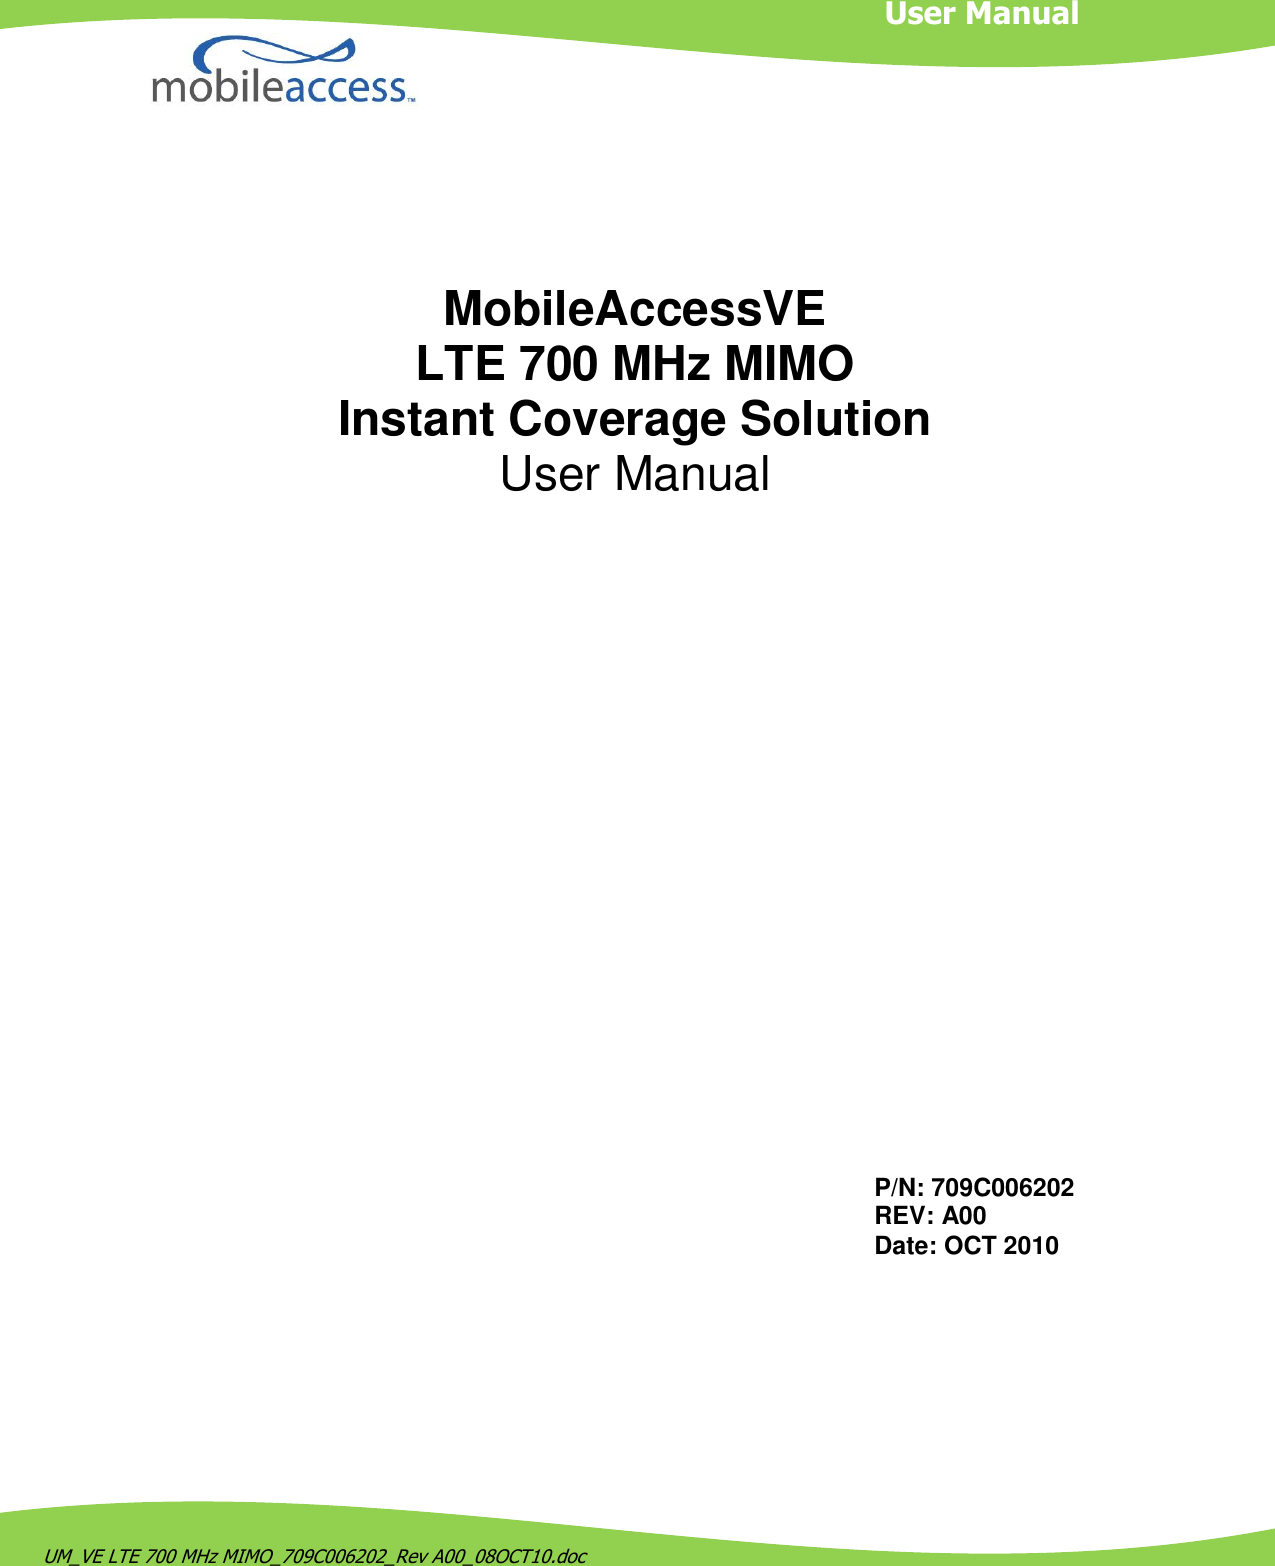   UM_VE LTE 700 MHz MIMO_709C006202_Rev A00_08OCT10.doc                         MobileAccessVE  LTE 700 MHz MIMO Instant Coverage Solution User Manual P/N: 709C006202 REV: A00 Date: OCT 2010 User Manual 